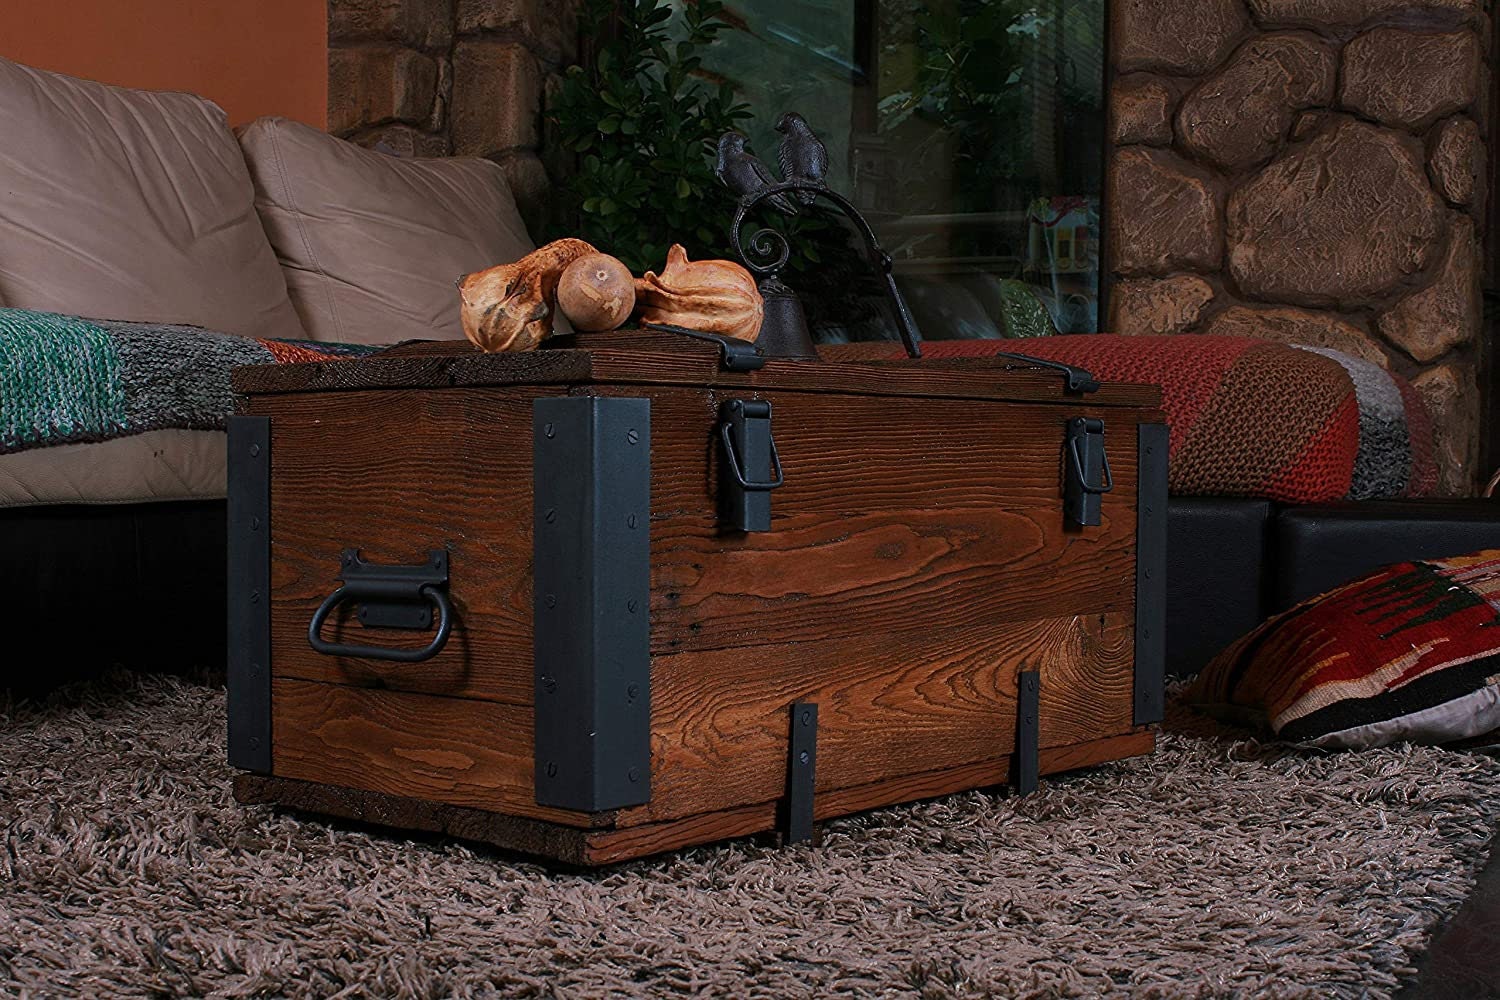 Coffee Table Trunk - Biltmore Trunk, Trunk Chest, Storage Trunk